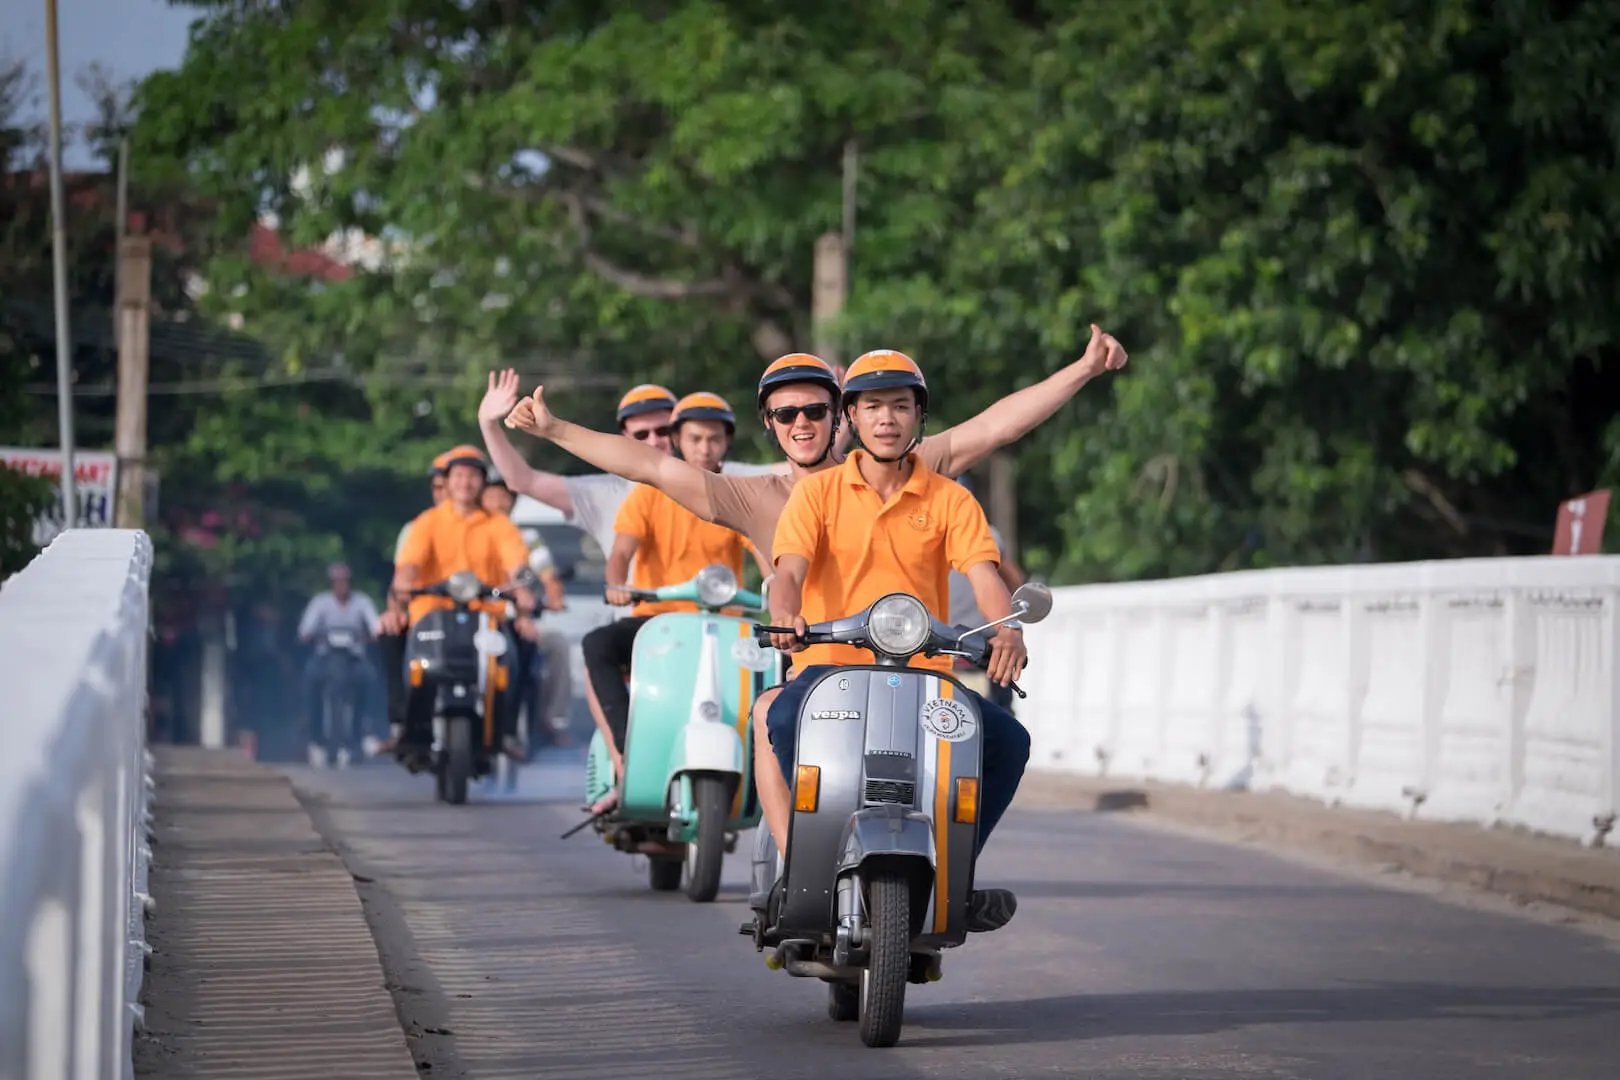 Suggested Best Itinerary Explore The Hoi An Vespa Tour Half-Day